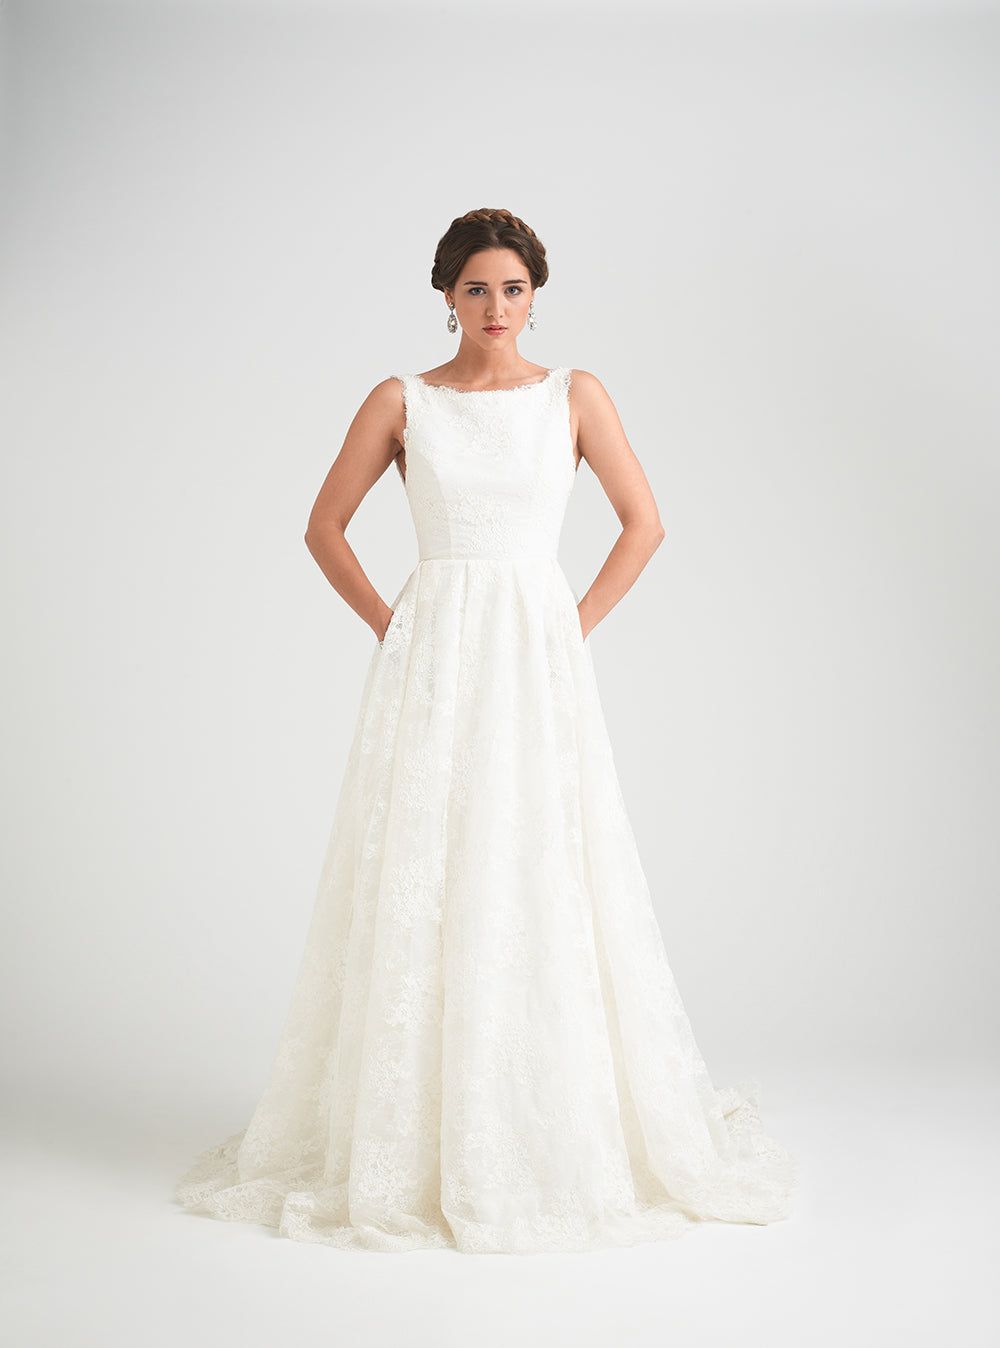 Lace Wedding Dress Trends and Styles